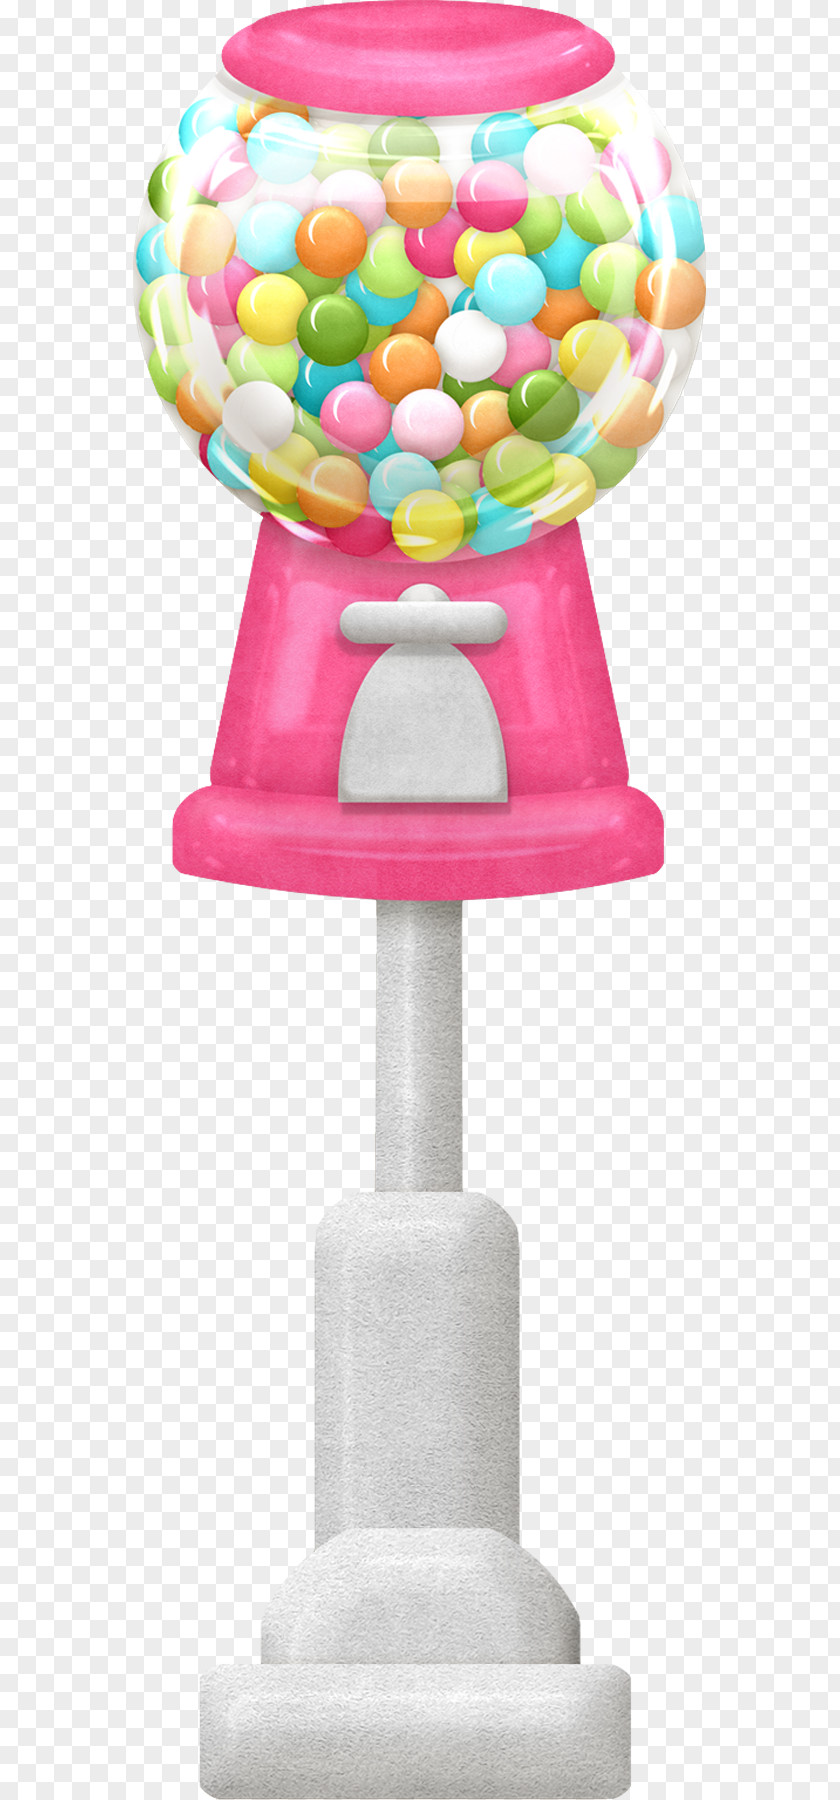 Jar Of Candy Chewing Gum Gumball Machine Bubble Clip Art PNG